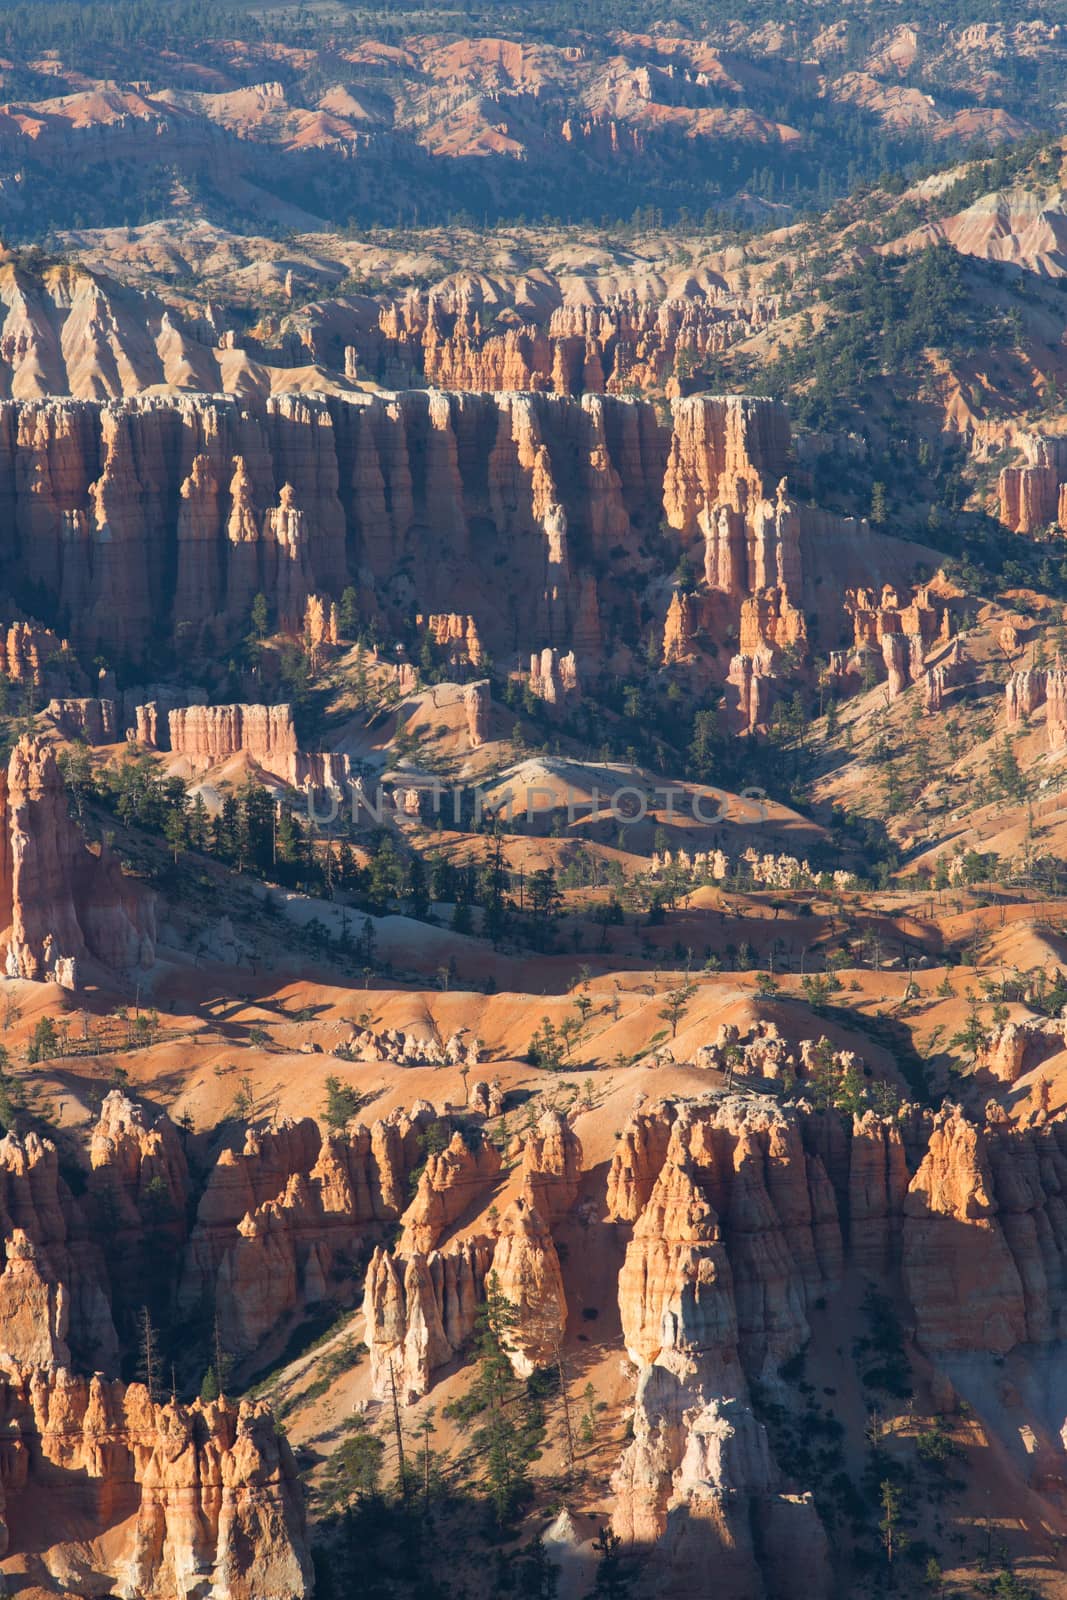 View to one of the amphitheatres of Bryce Canyon late afternoon with sunset